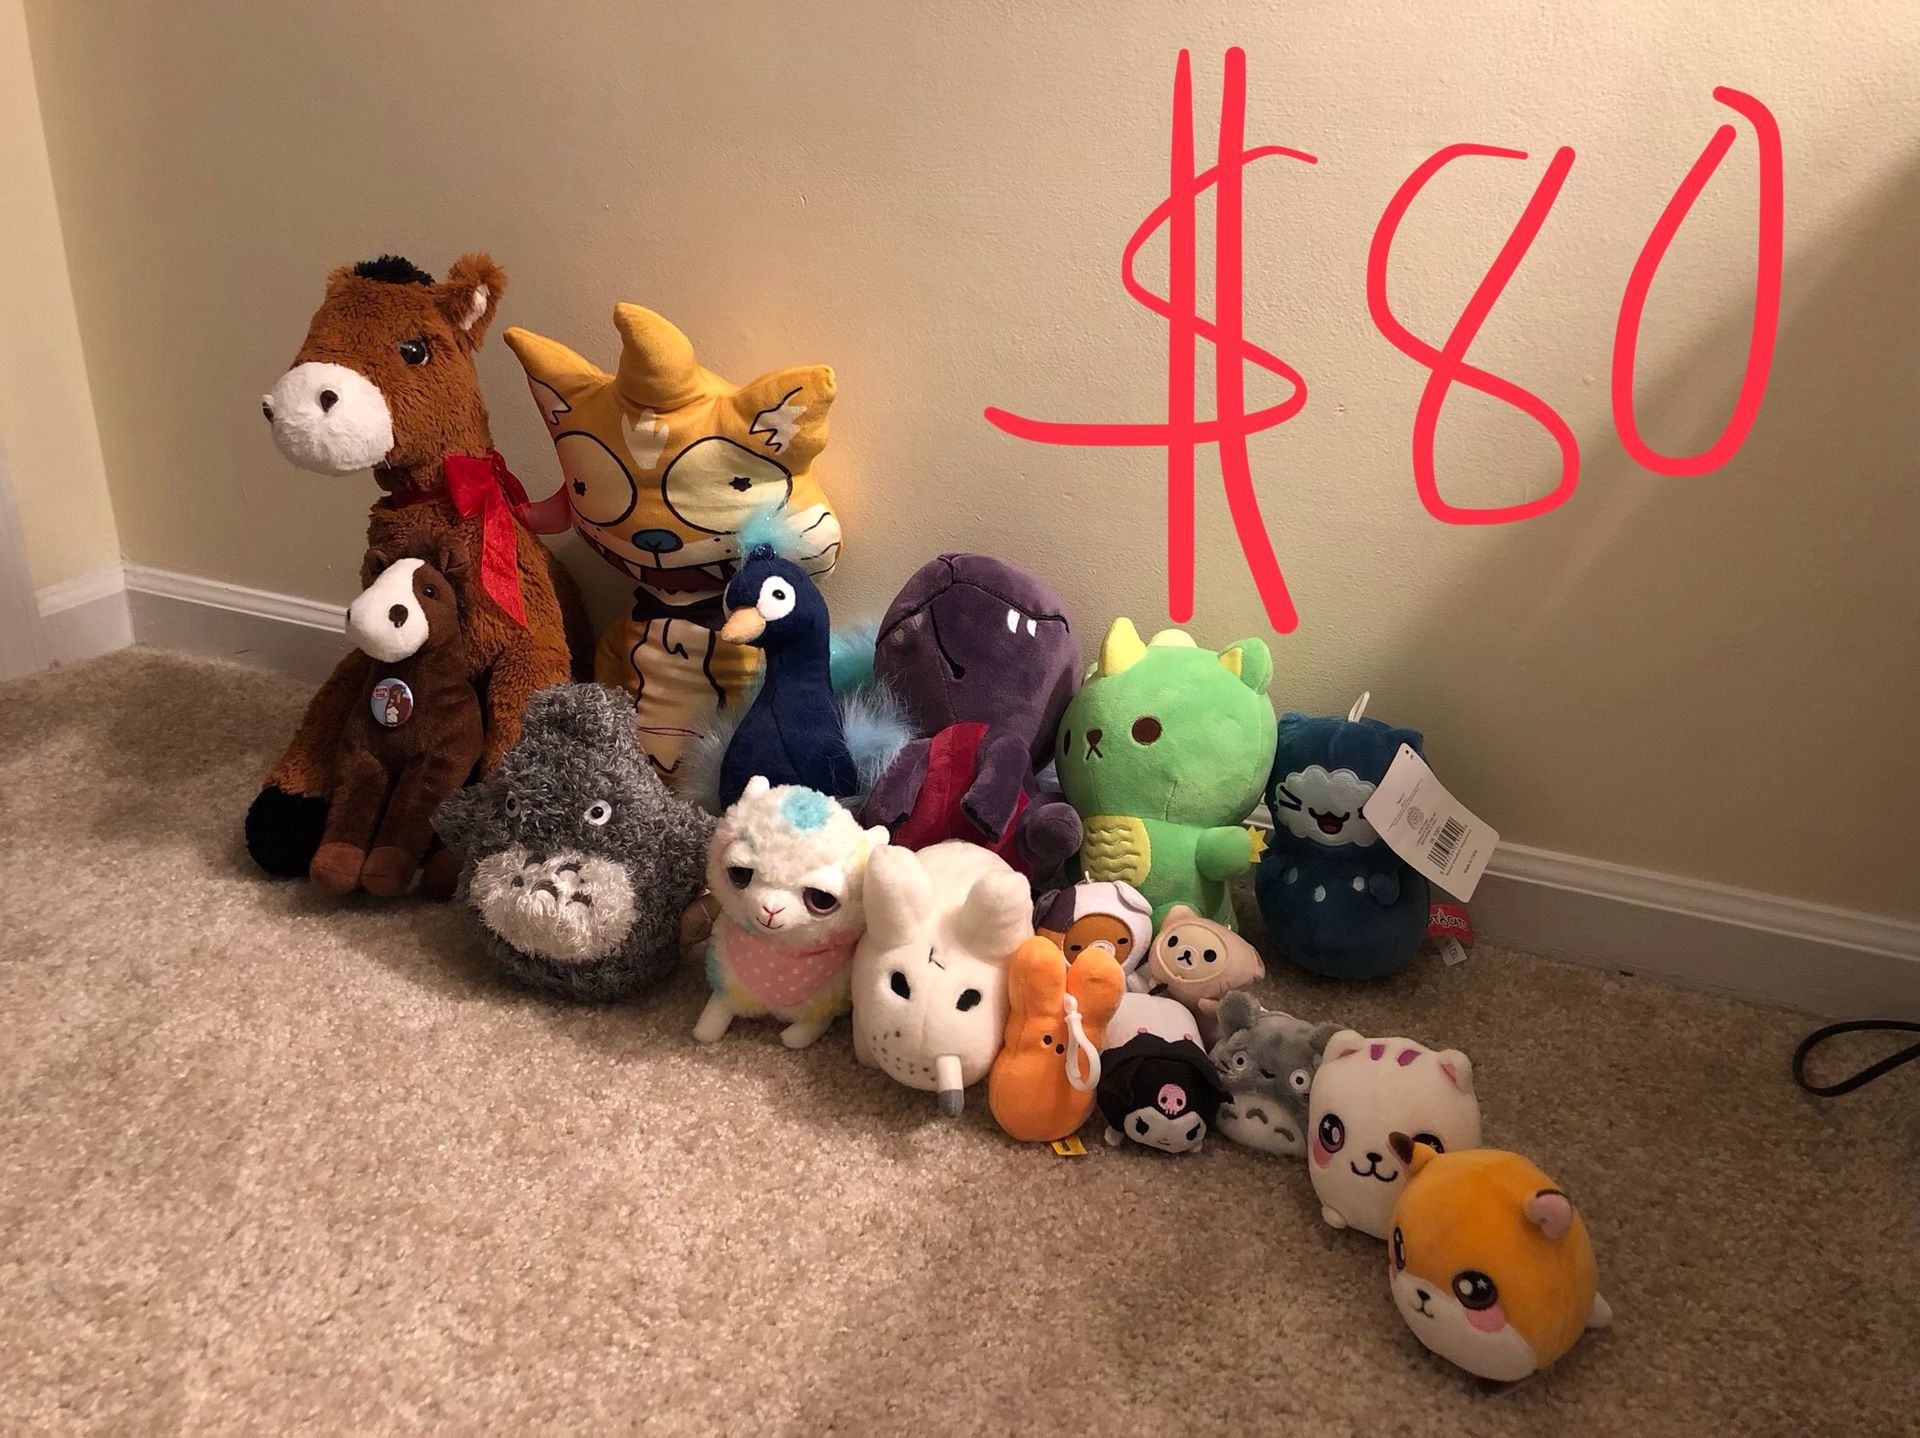 Lots of plushies